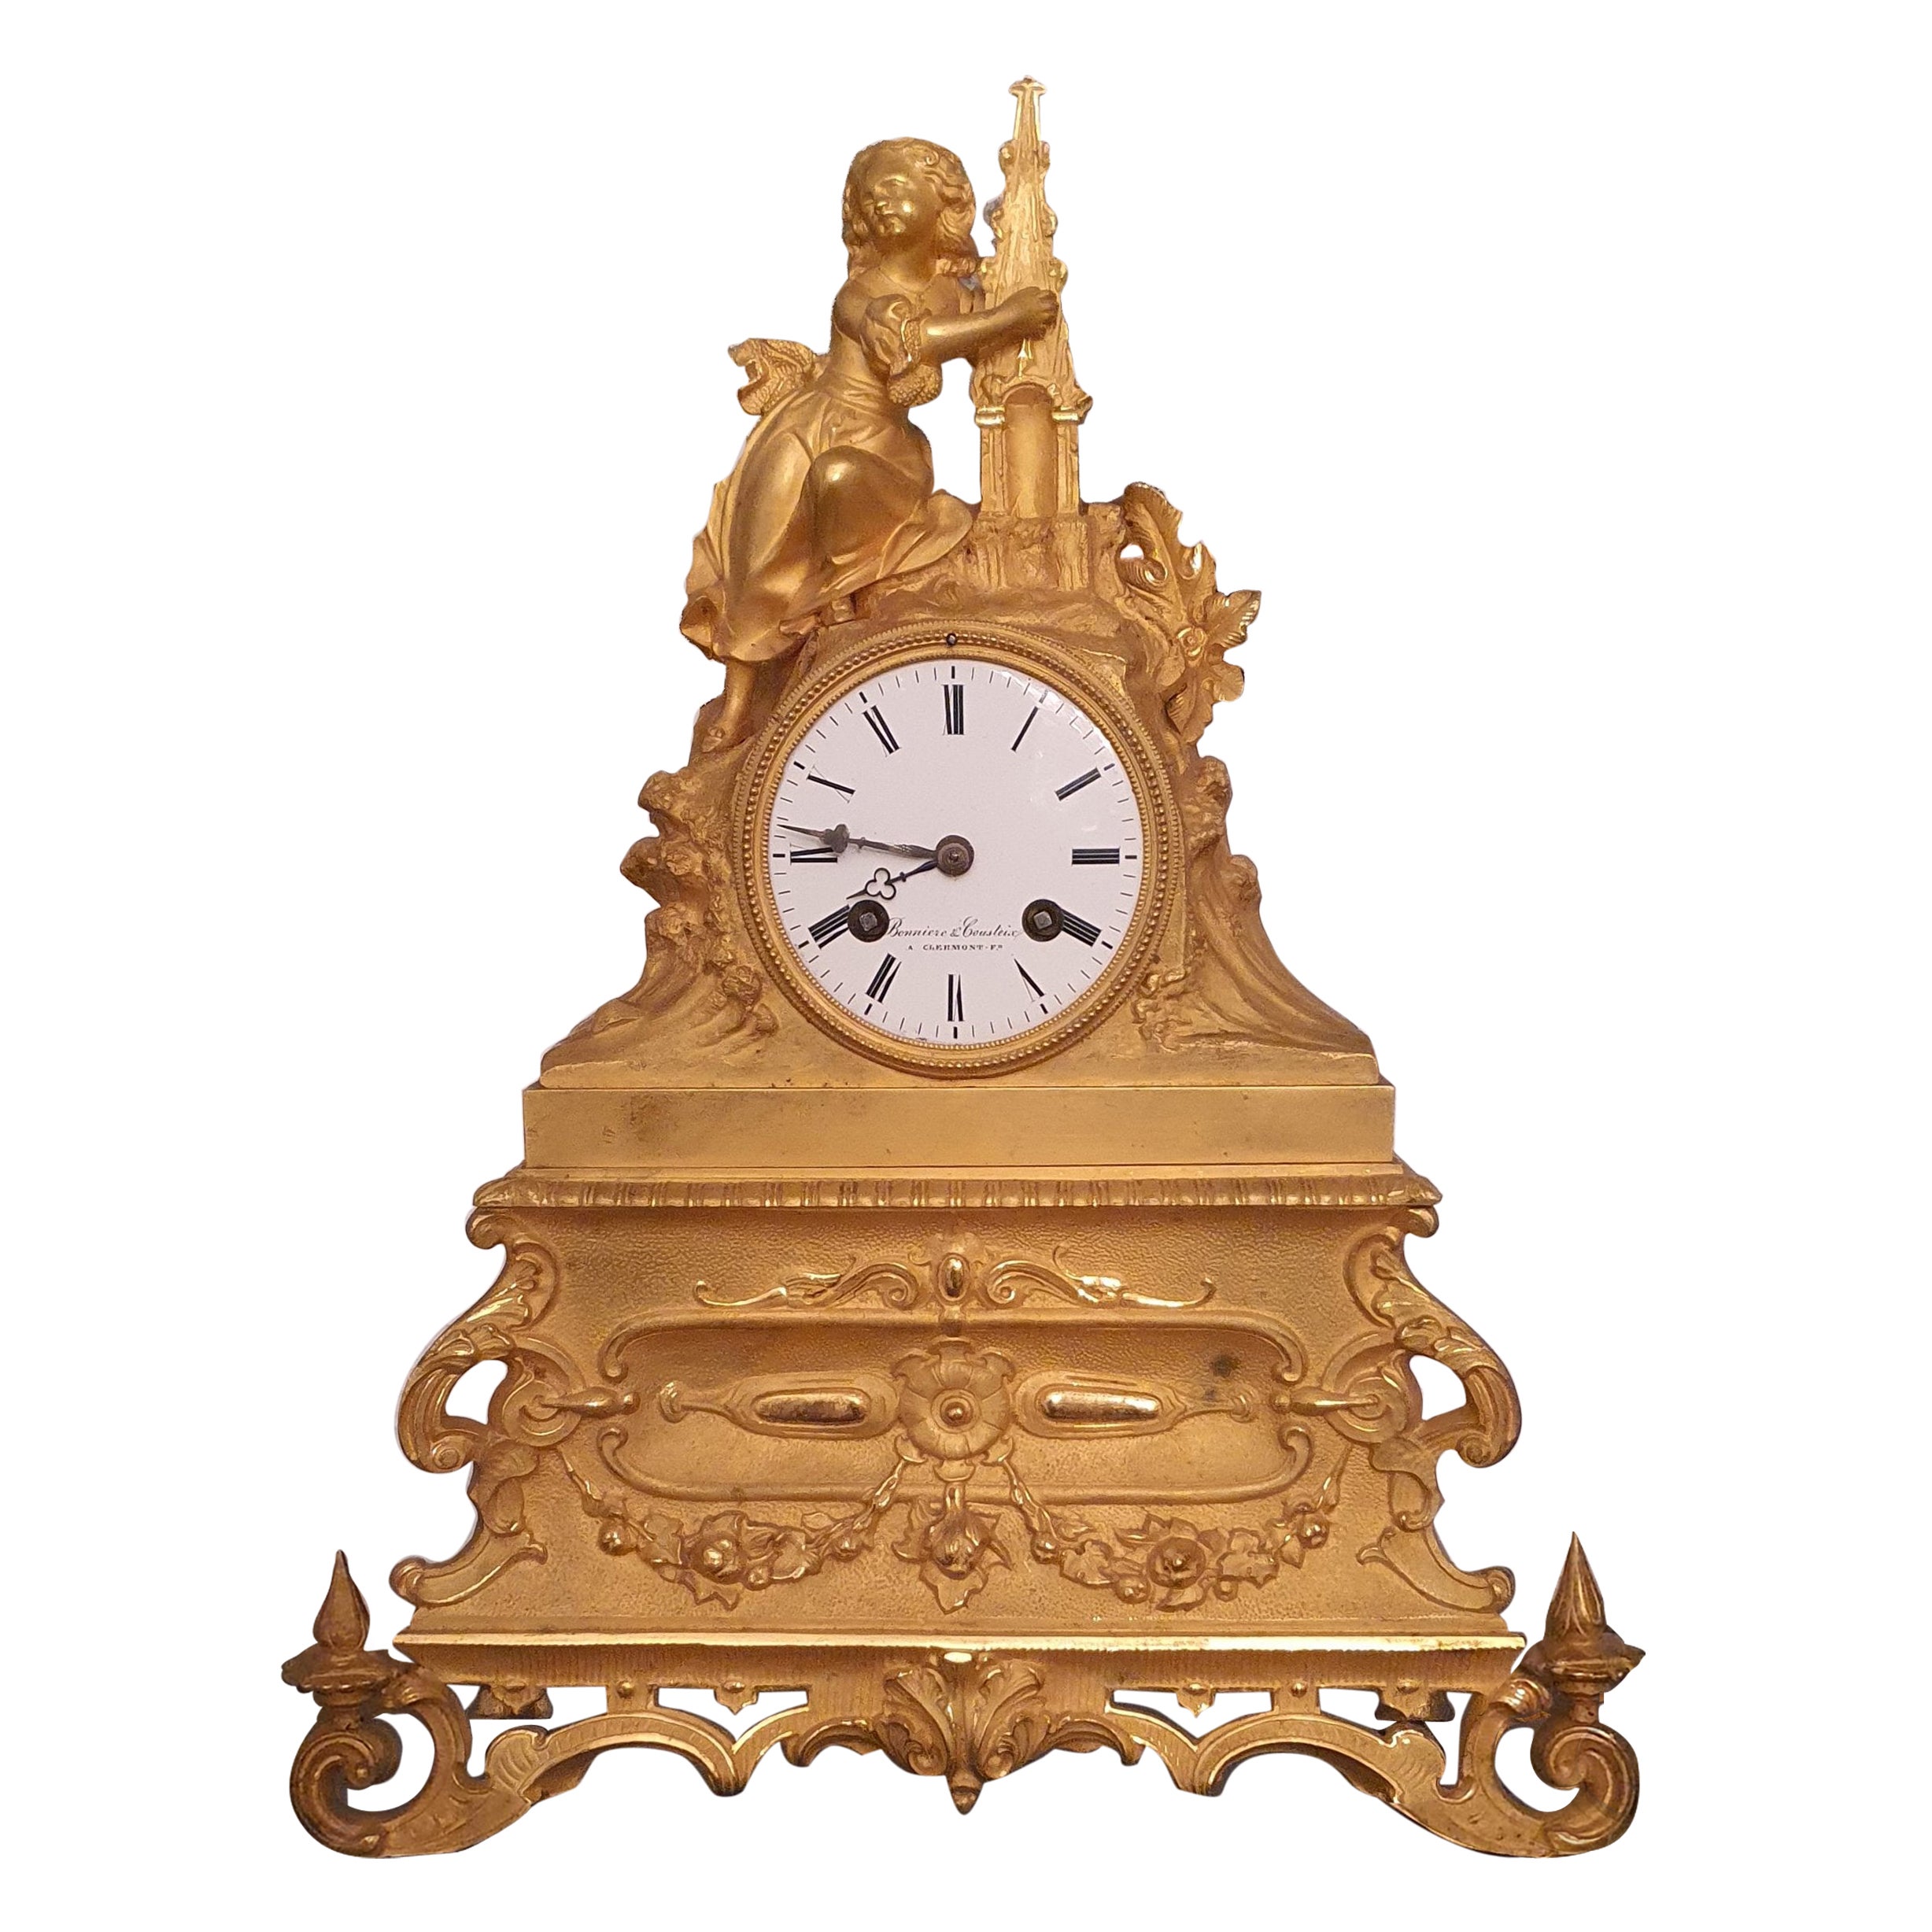 Exquisite 19th Gothic Revival Mantle Clock of Young Girl Holding Spire by Pons For Sale